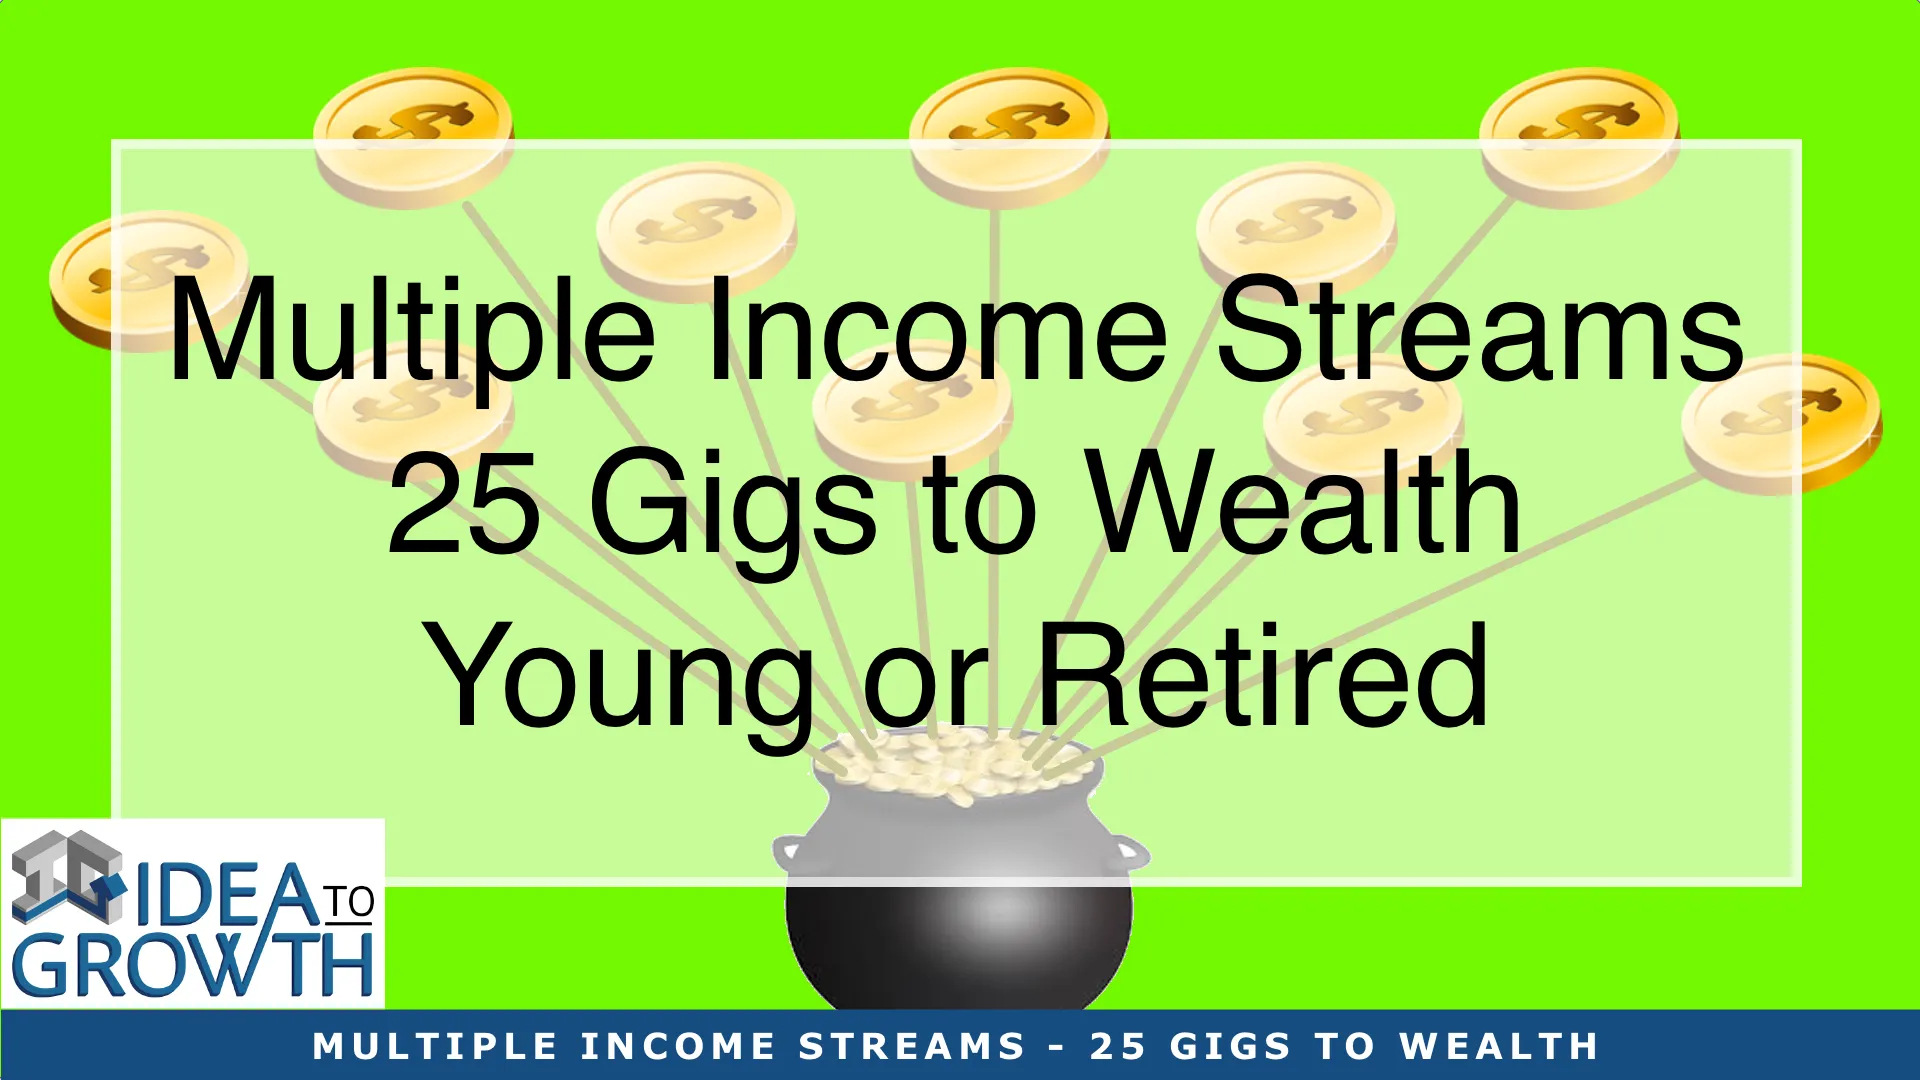 MULTIPLE INCOME STREAMS - 25 GIGS TO WEALTH